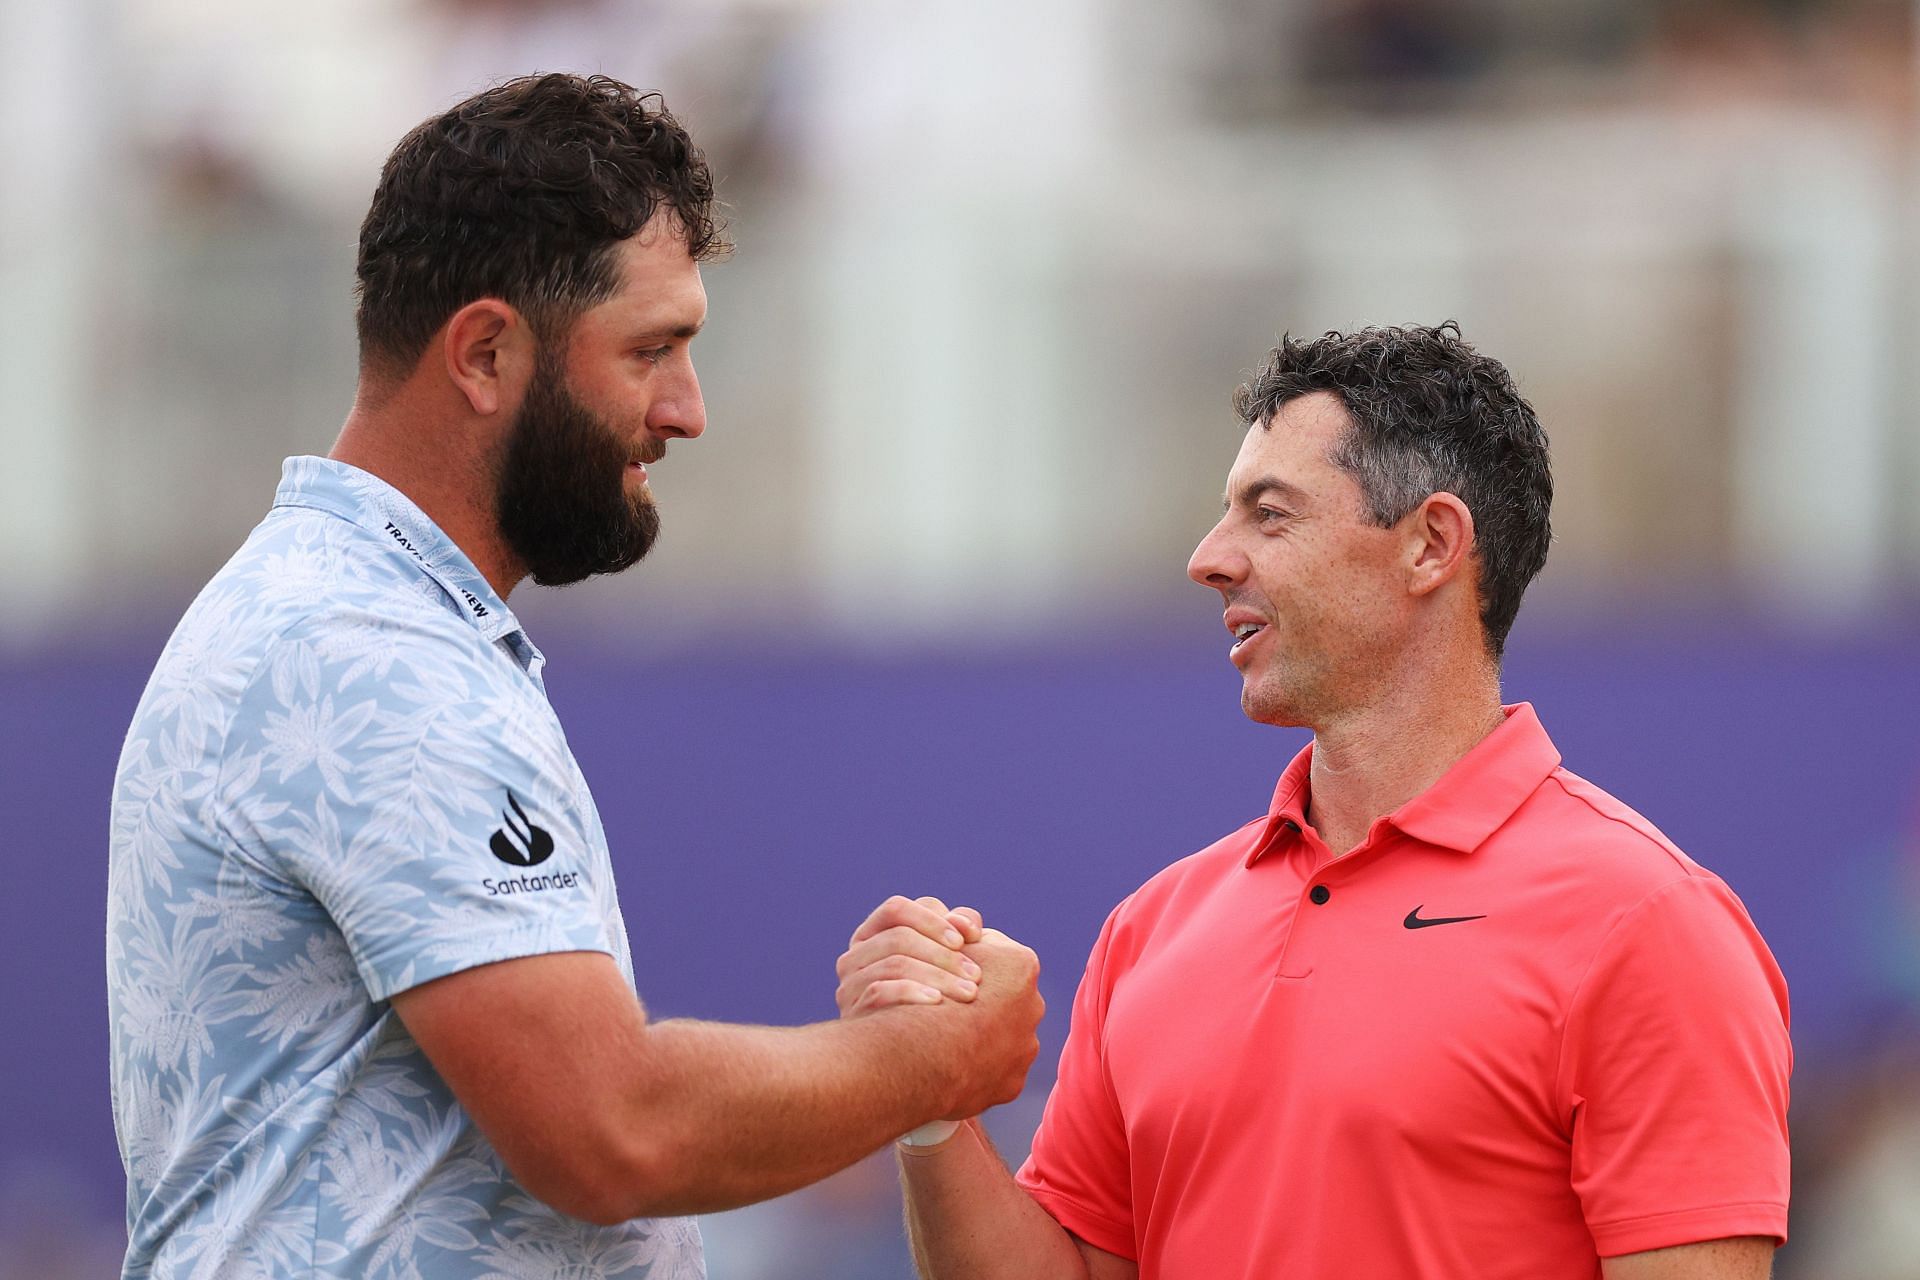 Jon Rahm and Rory McIlroy share a thought about global golf